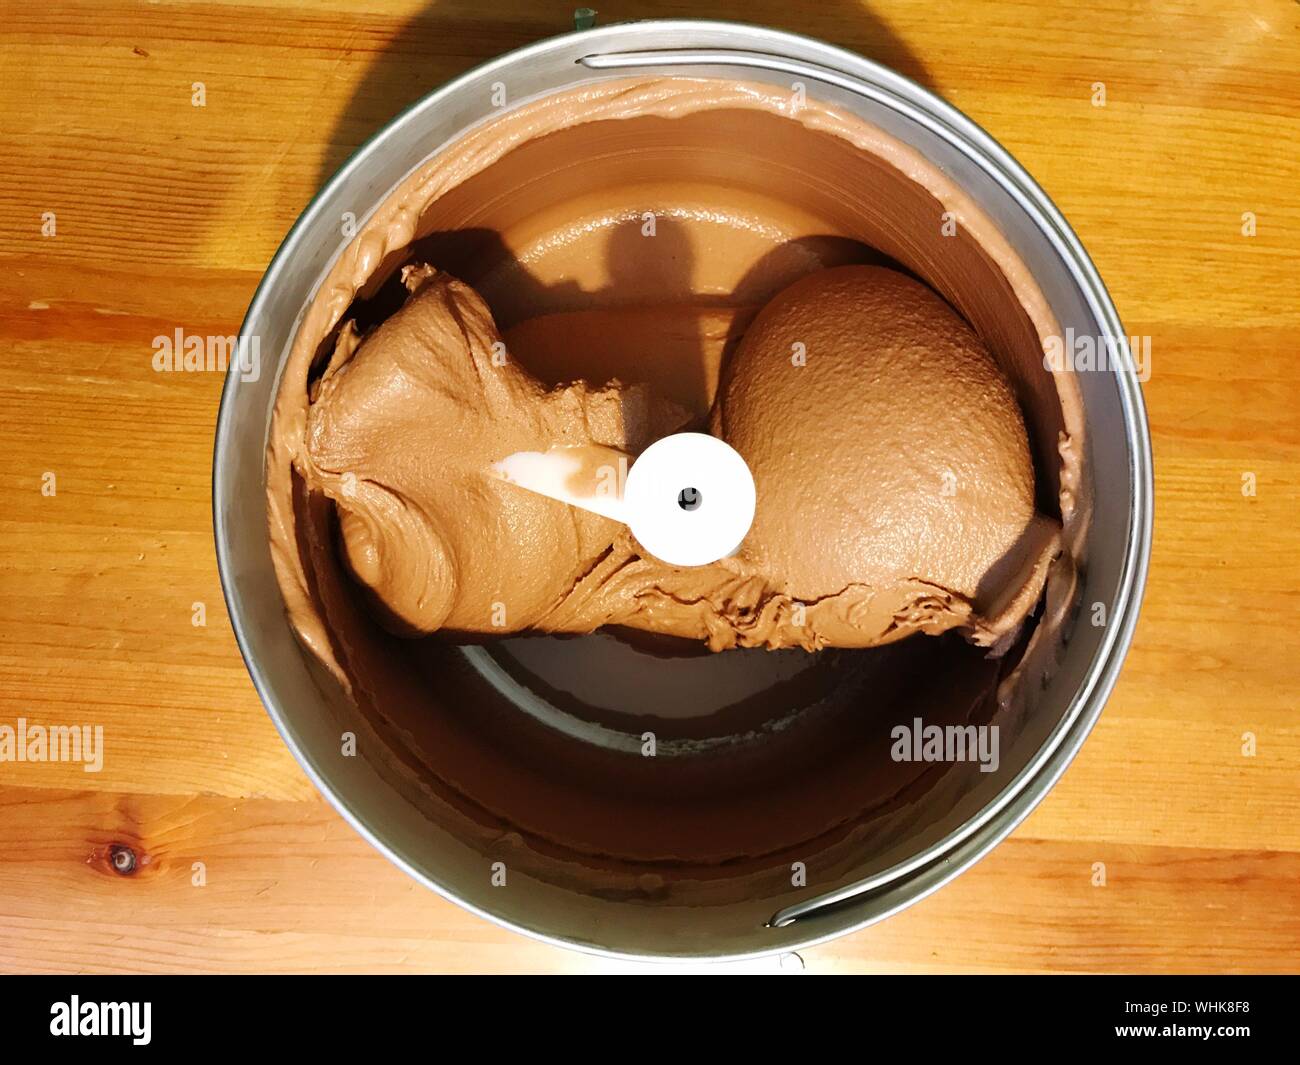 Directly Above Shot Of Chocolate Ice Cream In Maker On Table Stock Photo